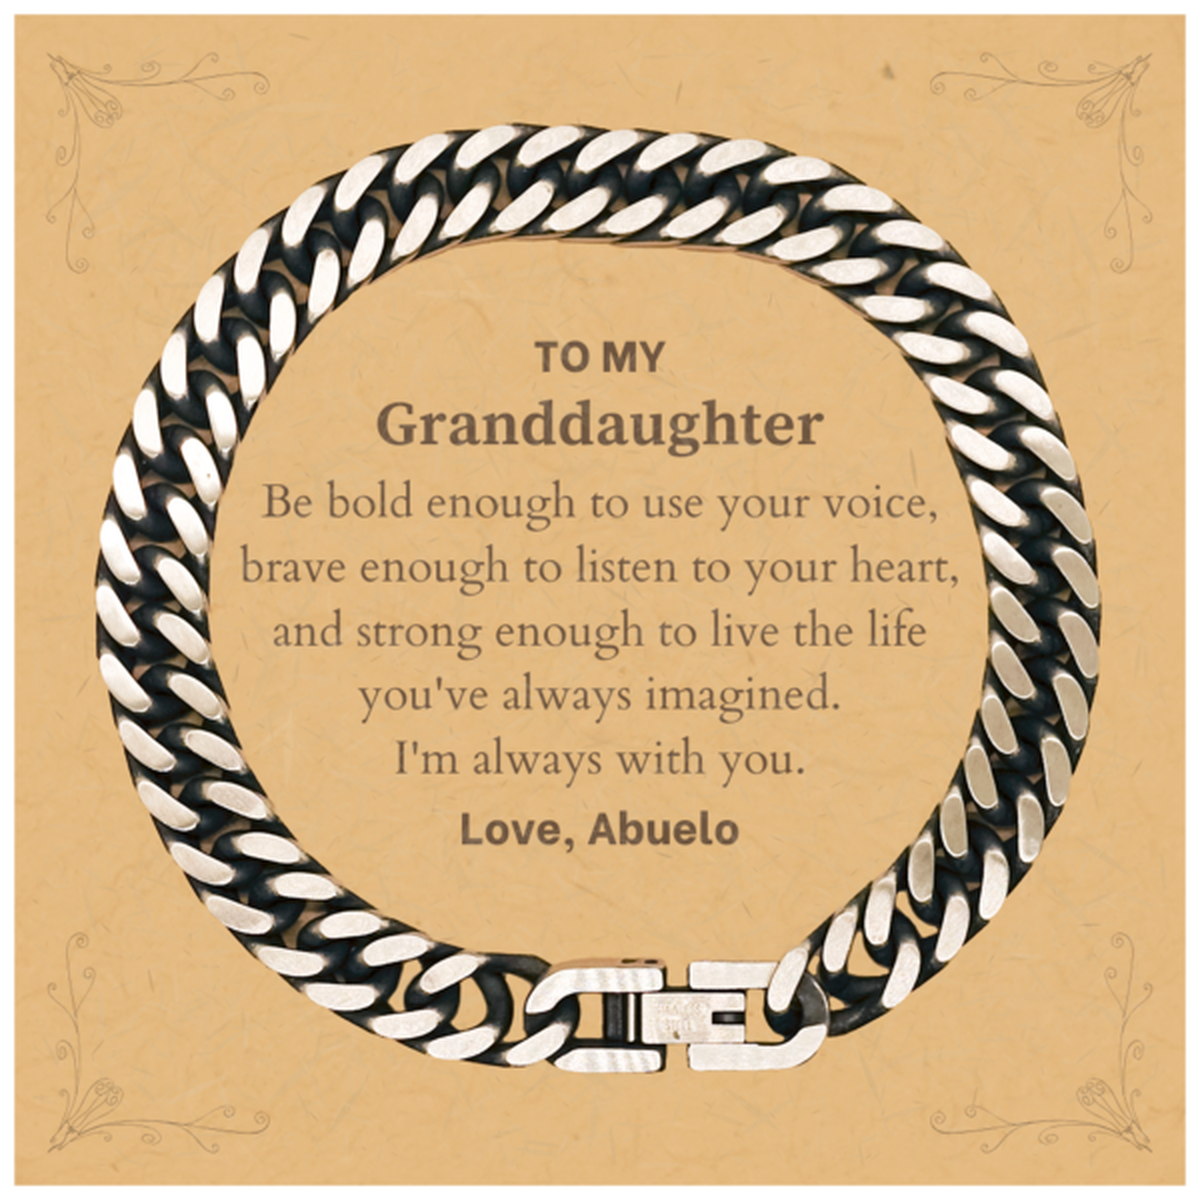 Keepsake Granddaughter Cuban Link Chain Bracelet Gift Idea Graduation Christmas Birthday Granddaughter from Abuelo, Granddaughter Be bold enough to use your voice, brave enough to listen to your heart. Love, Abuelo